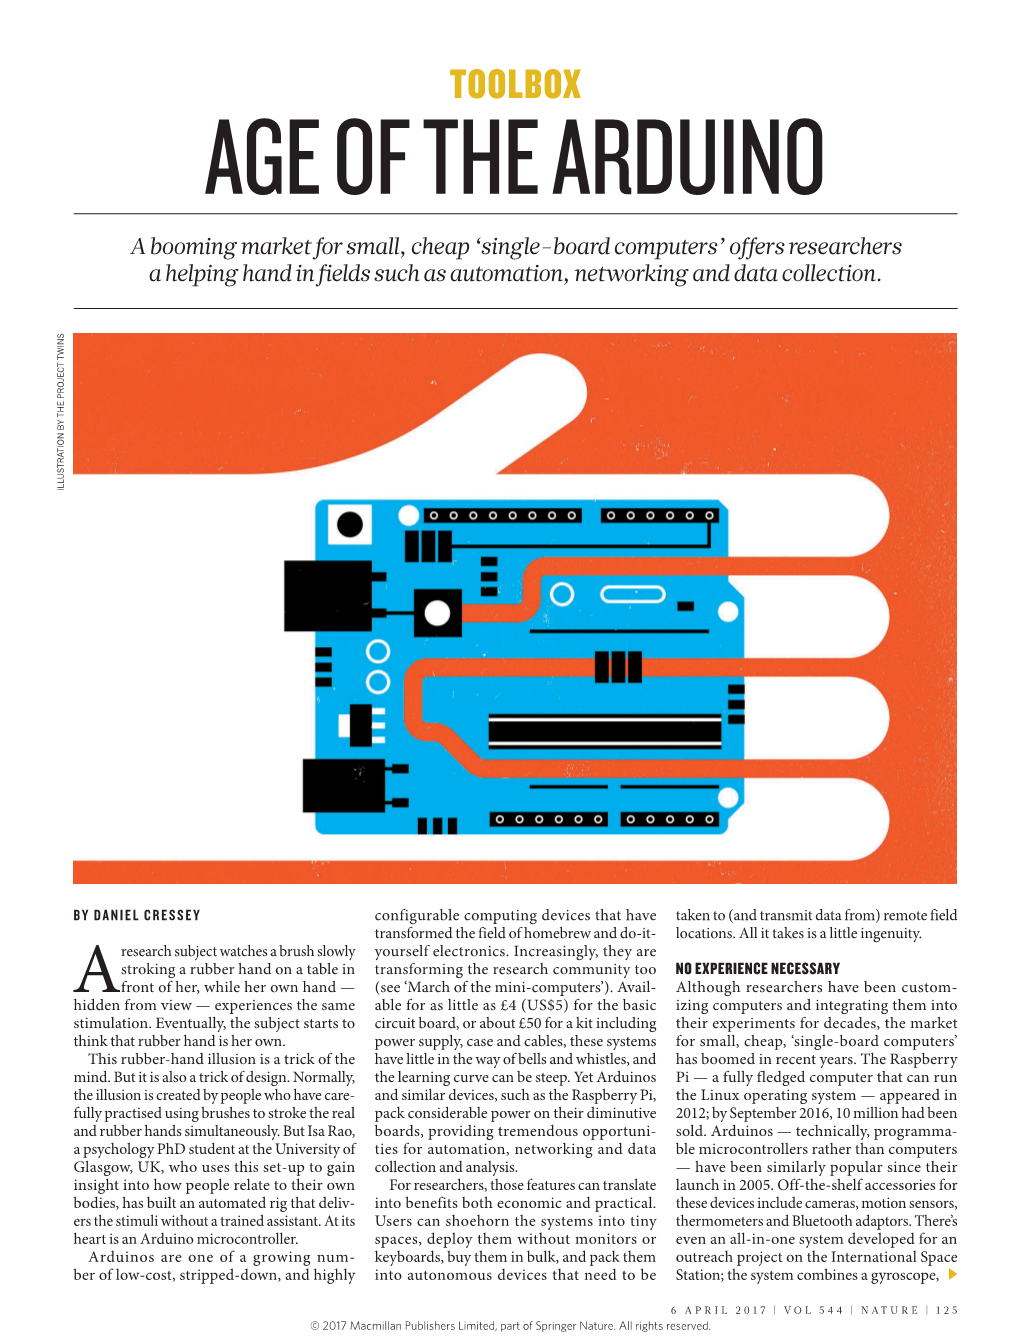 Age of the Arduino